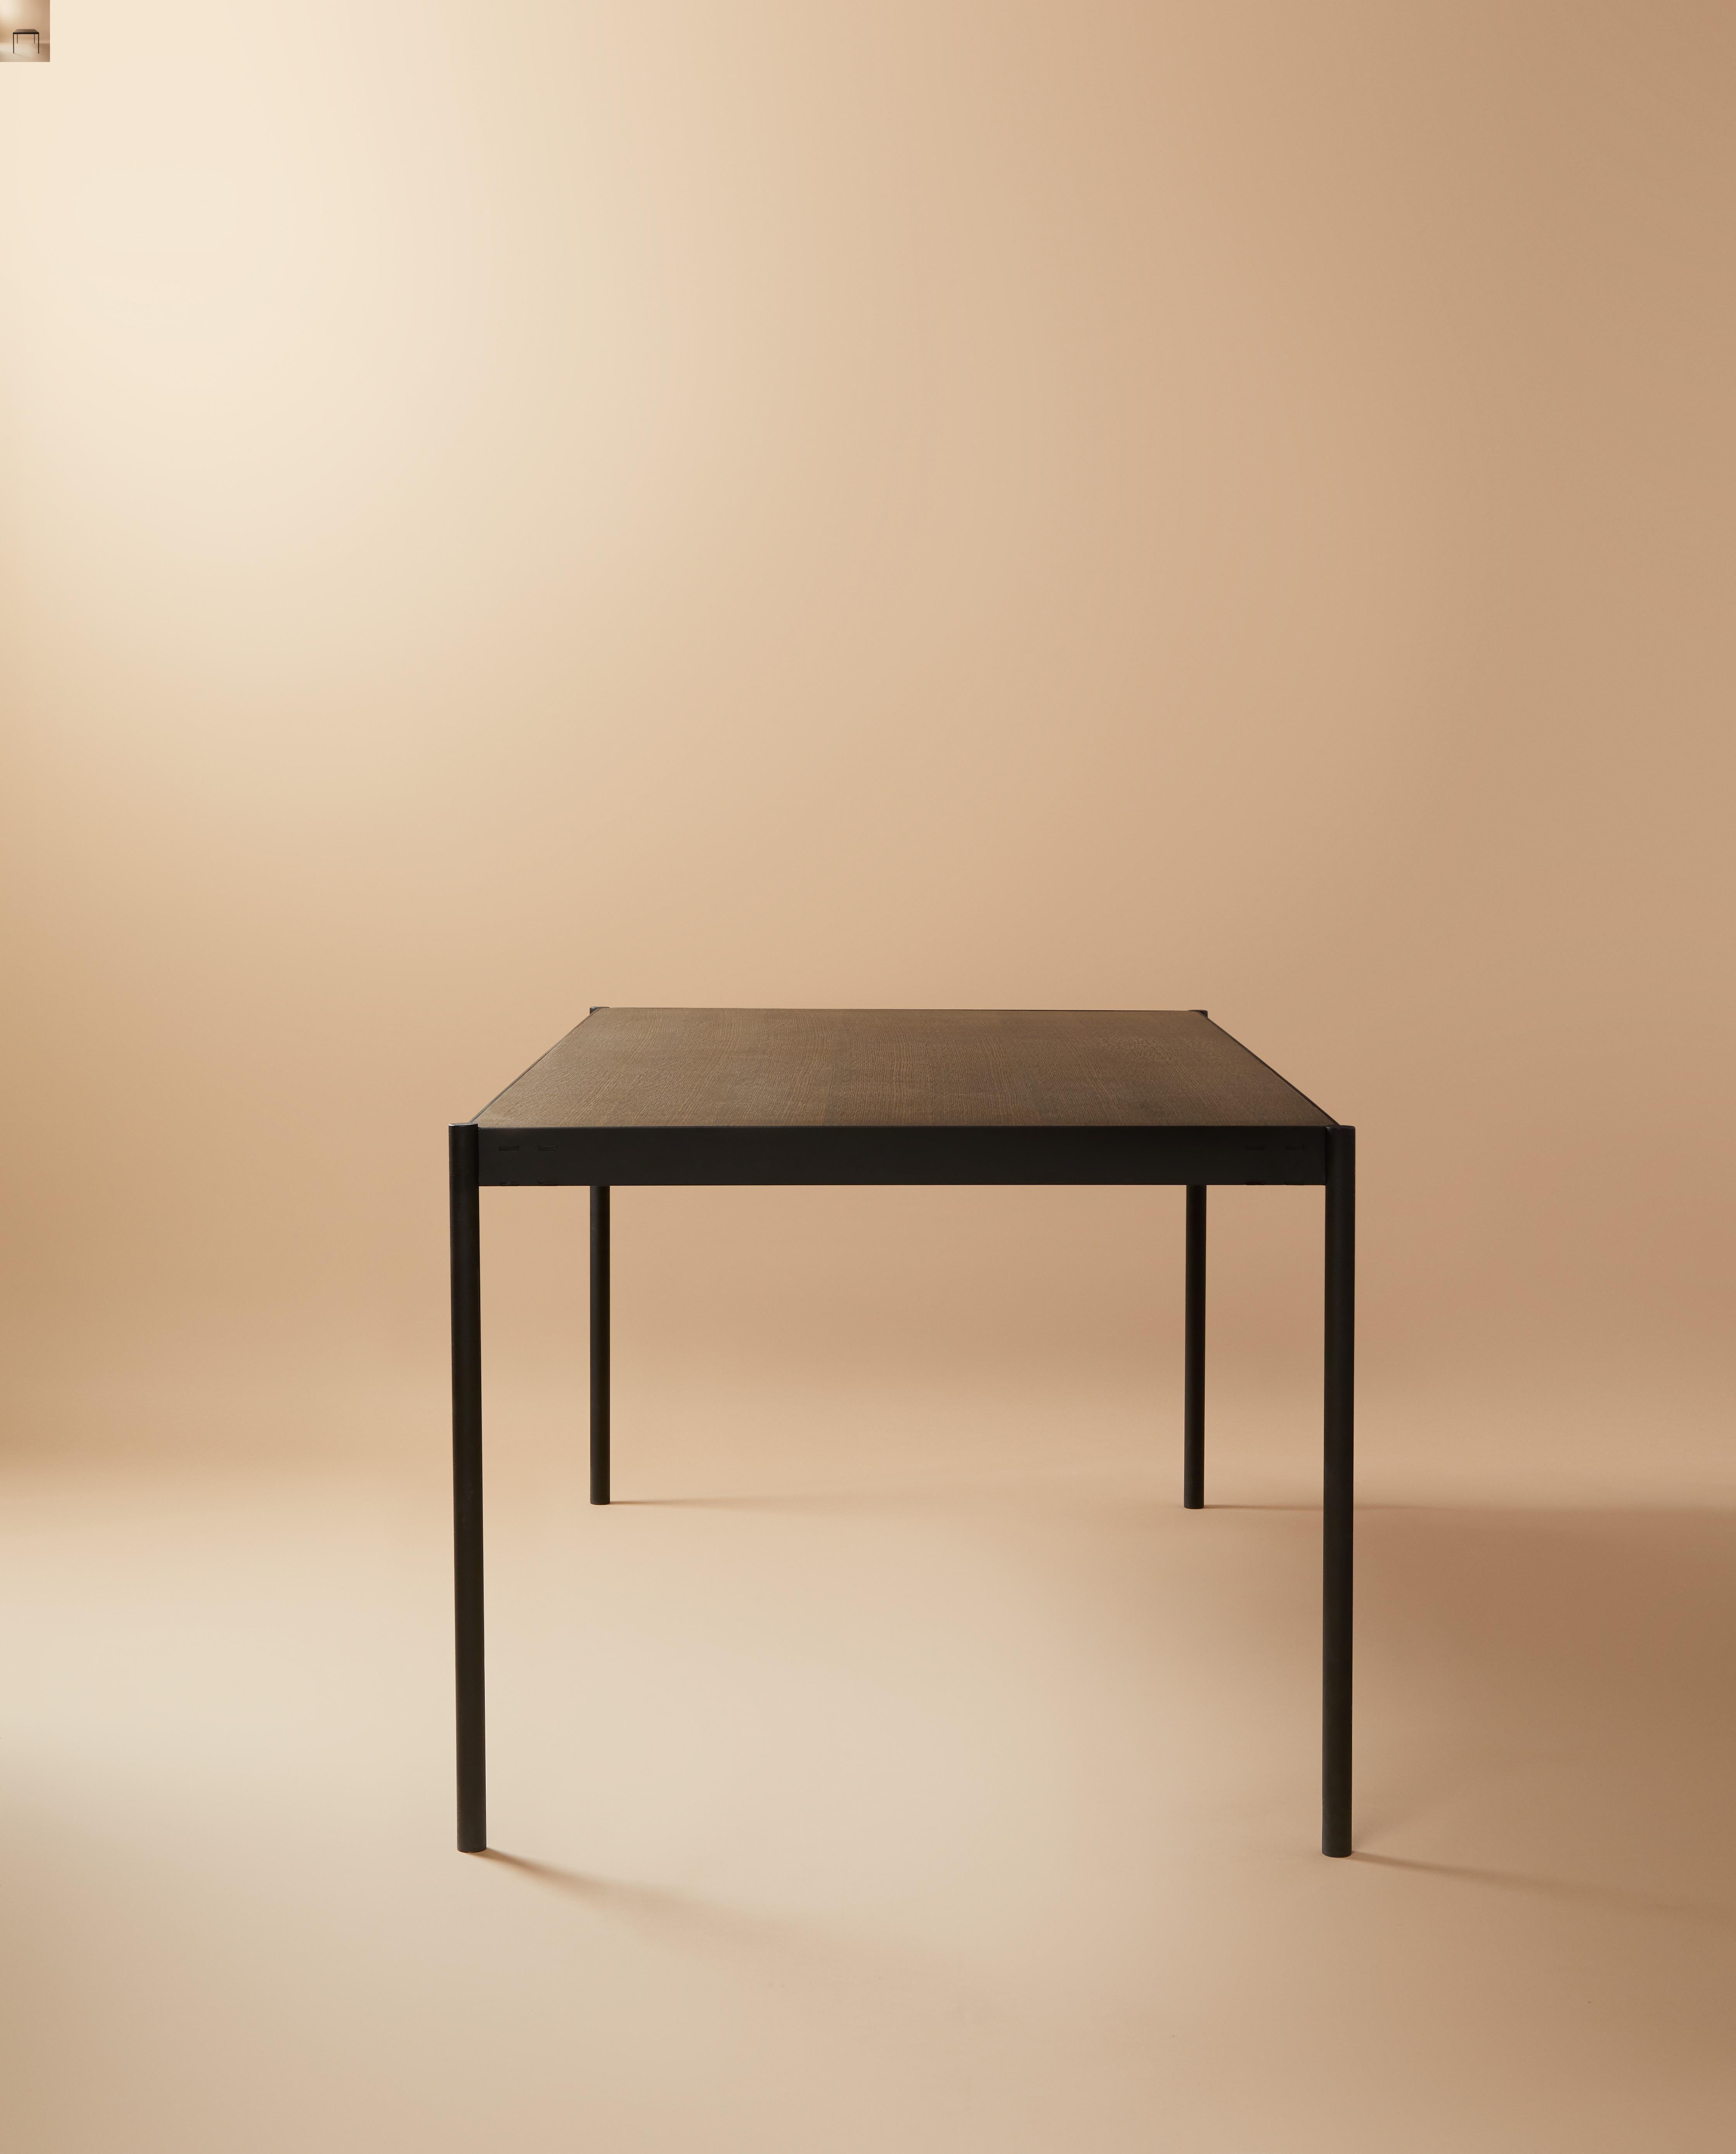 A slim-line table designed with both aesthetics and practicality in mind, the Wexford’s proportions are elegant and minimal, with an engaging play on texture. Designed as a flat-pack product, the piece is also easy to self-assemble. 

A minimal